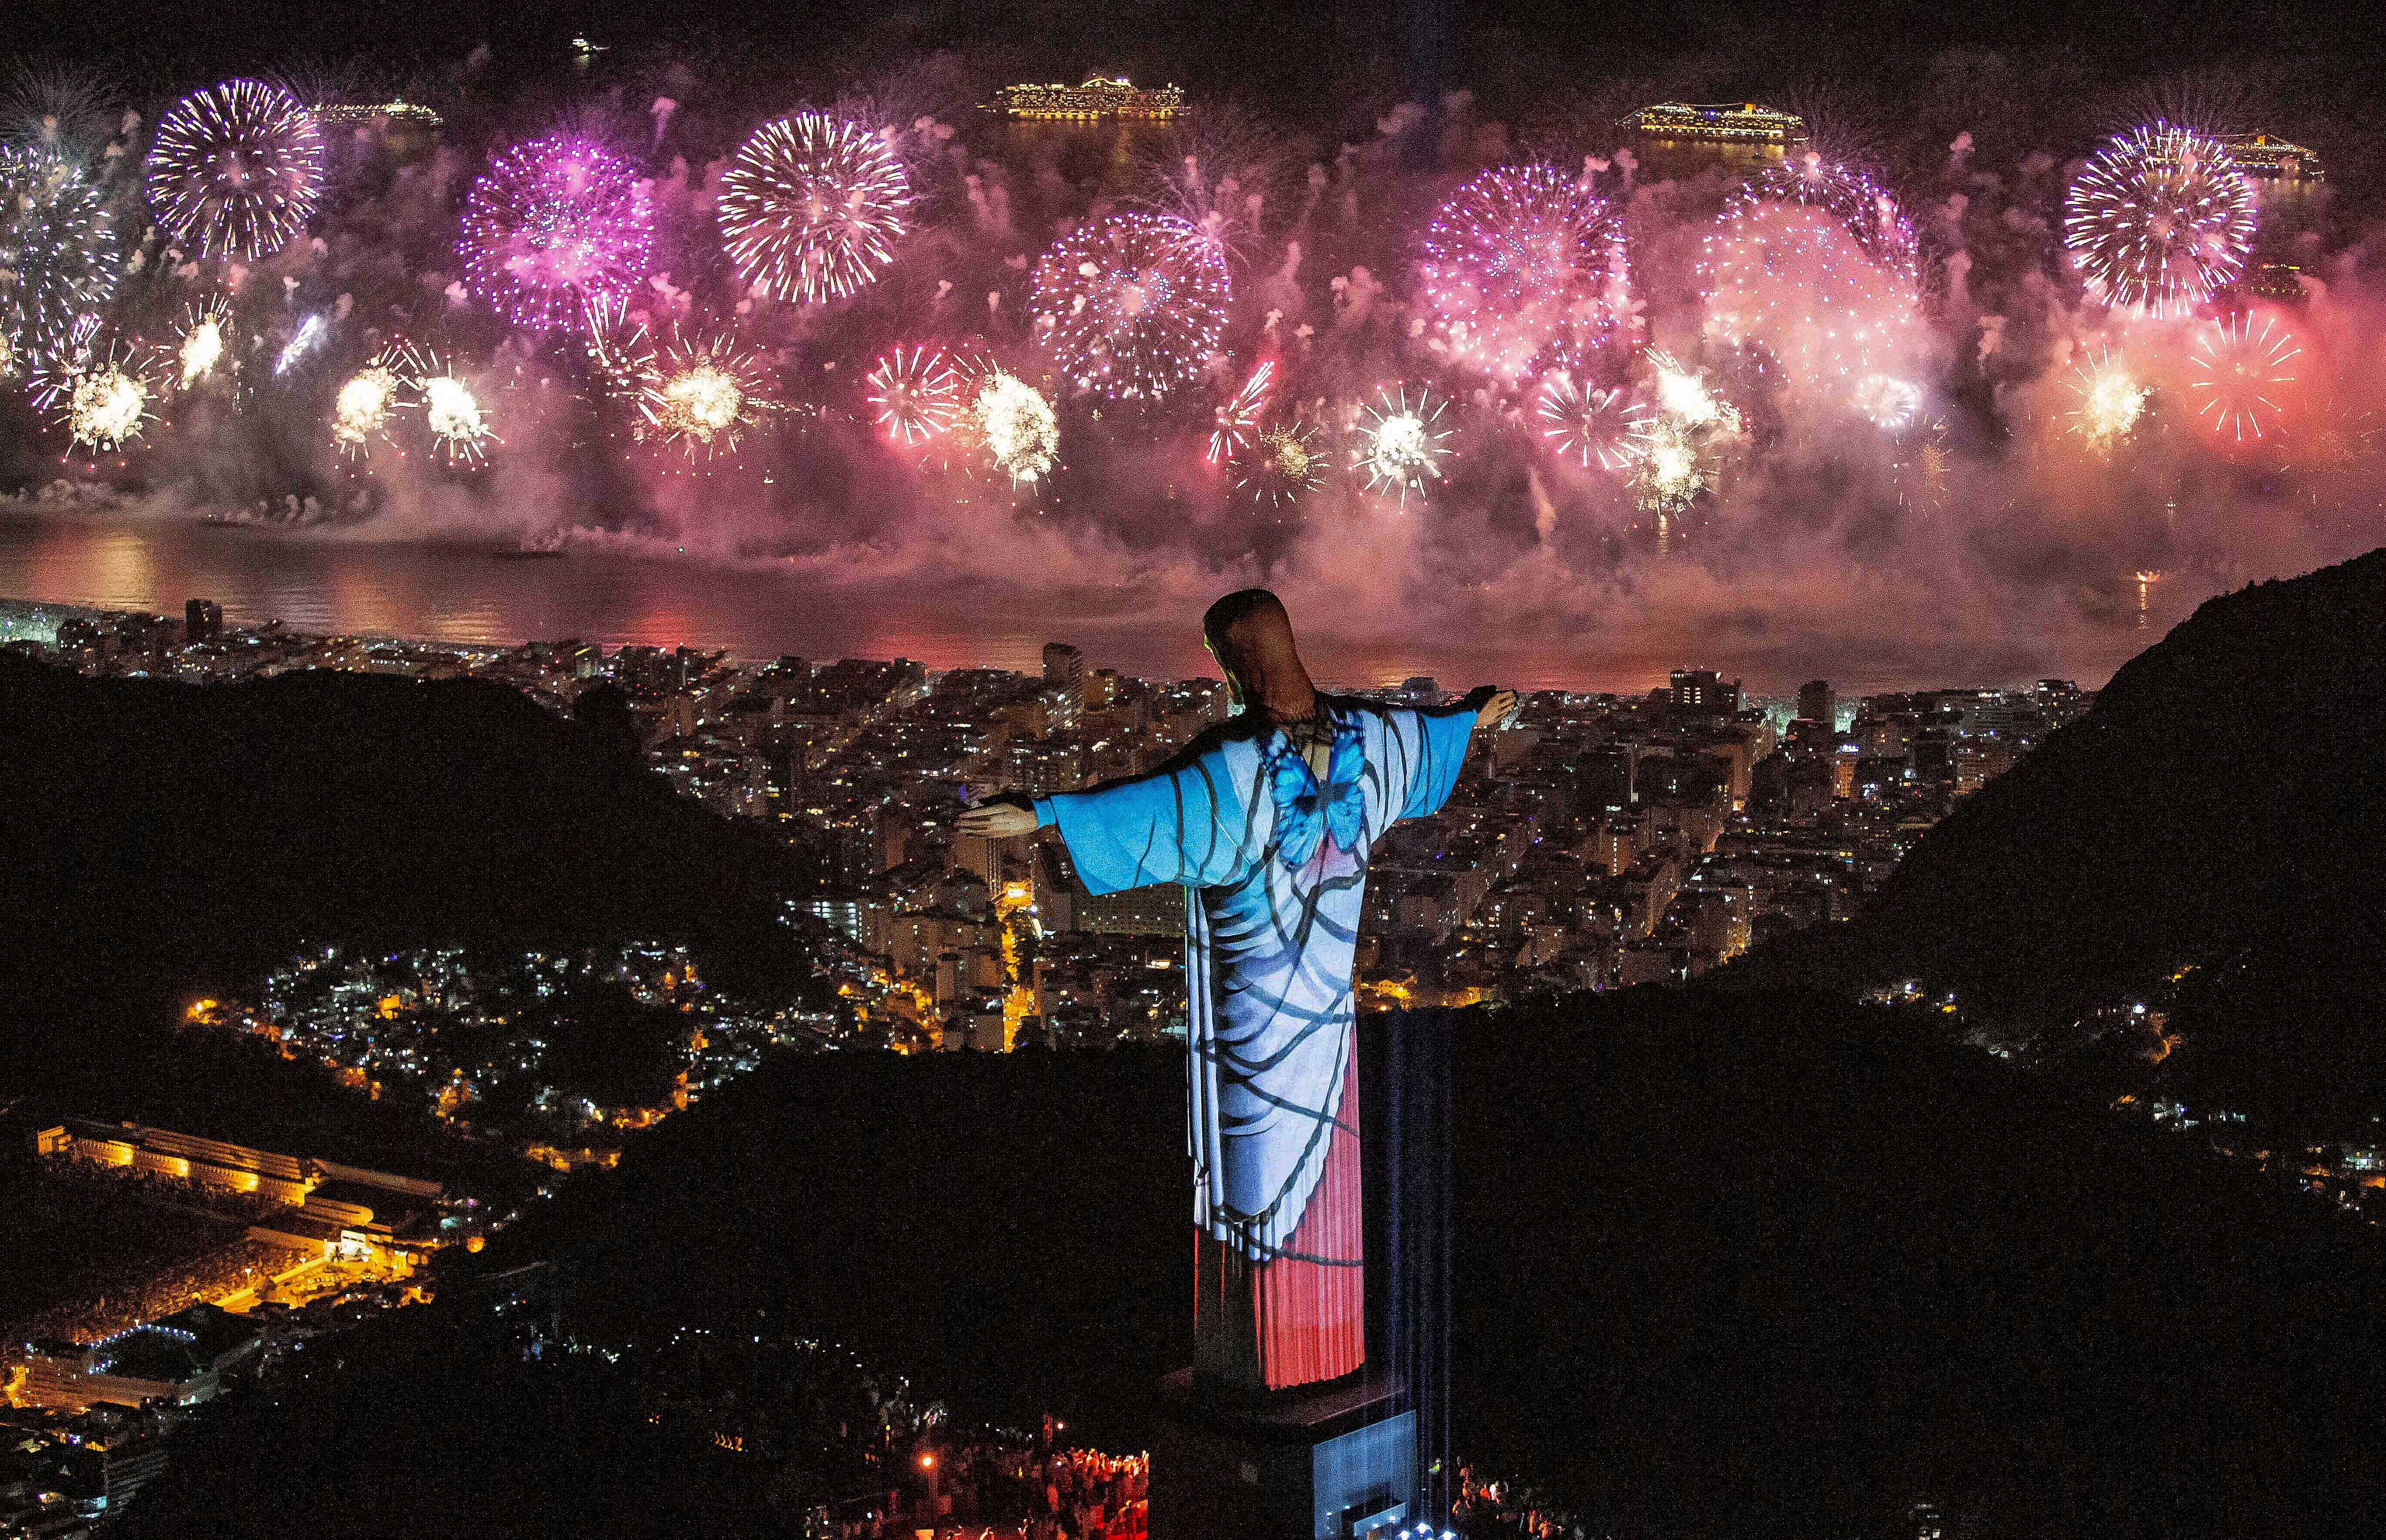 A fireworks display behind Christ the Redeemer during New Year’s Eve celebrations in Rio de Janeiro, Brazil